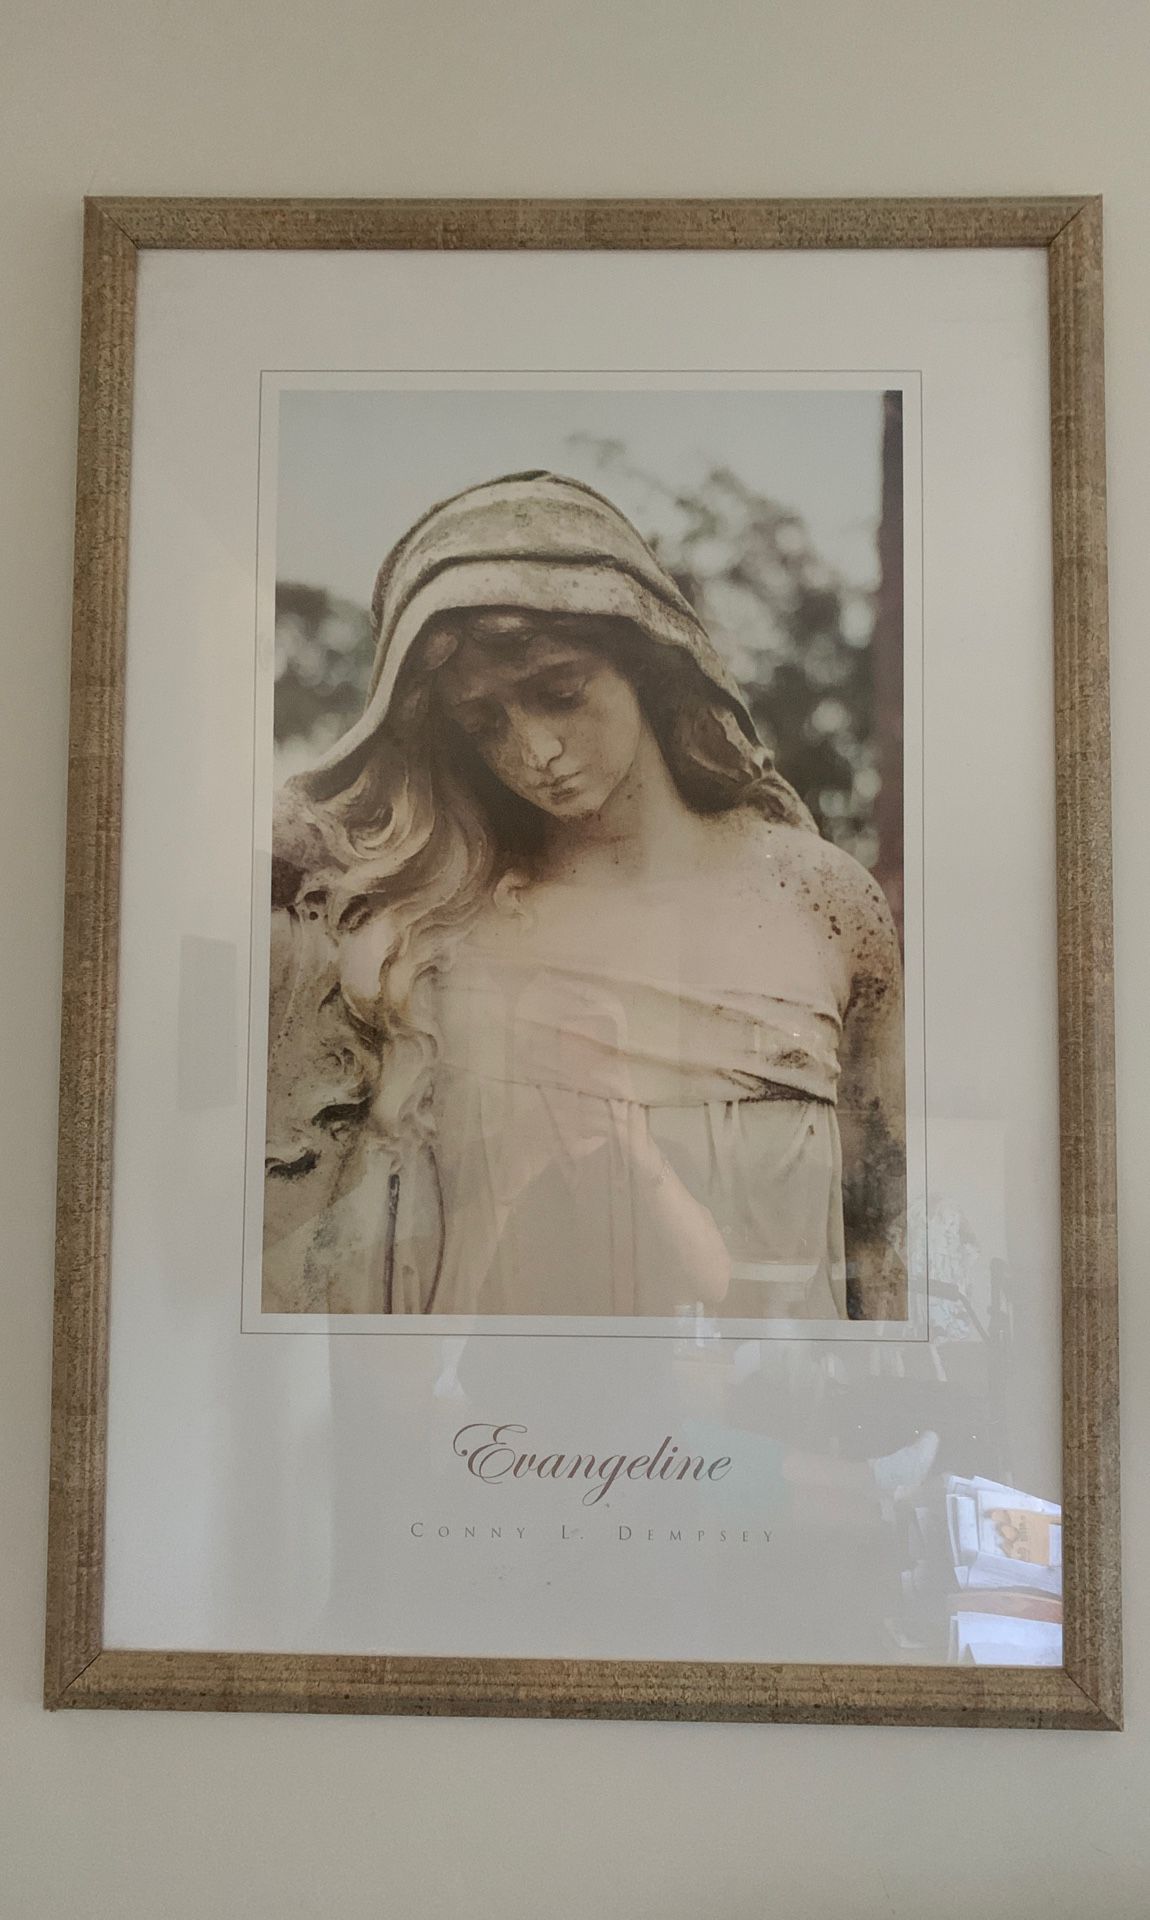 BEAUTIFUL Evangeline by Conny L. Dempsey Artwork picture in frame